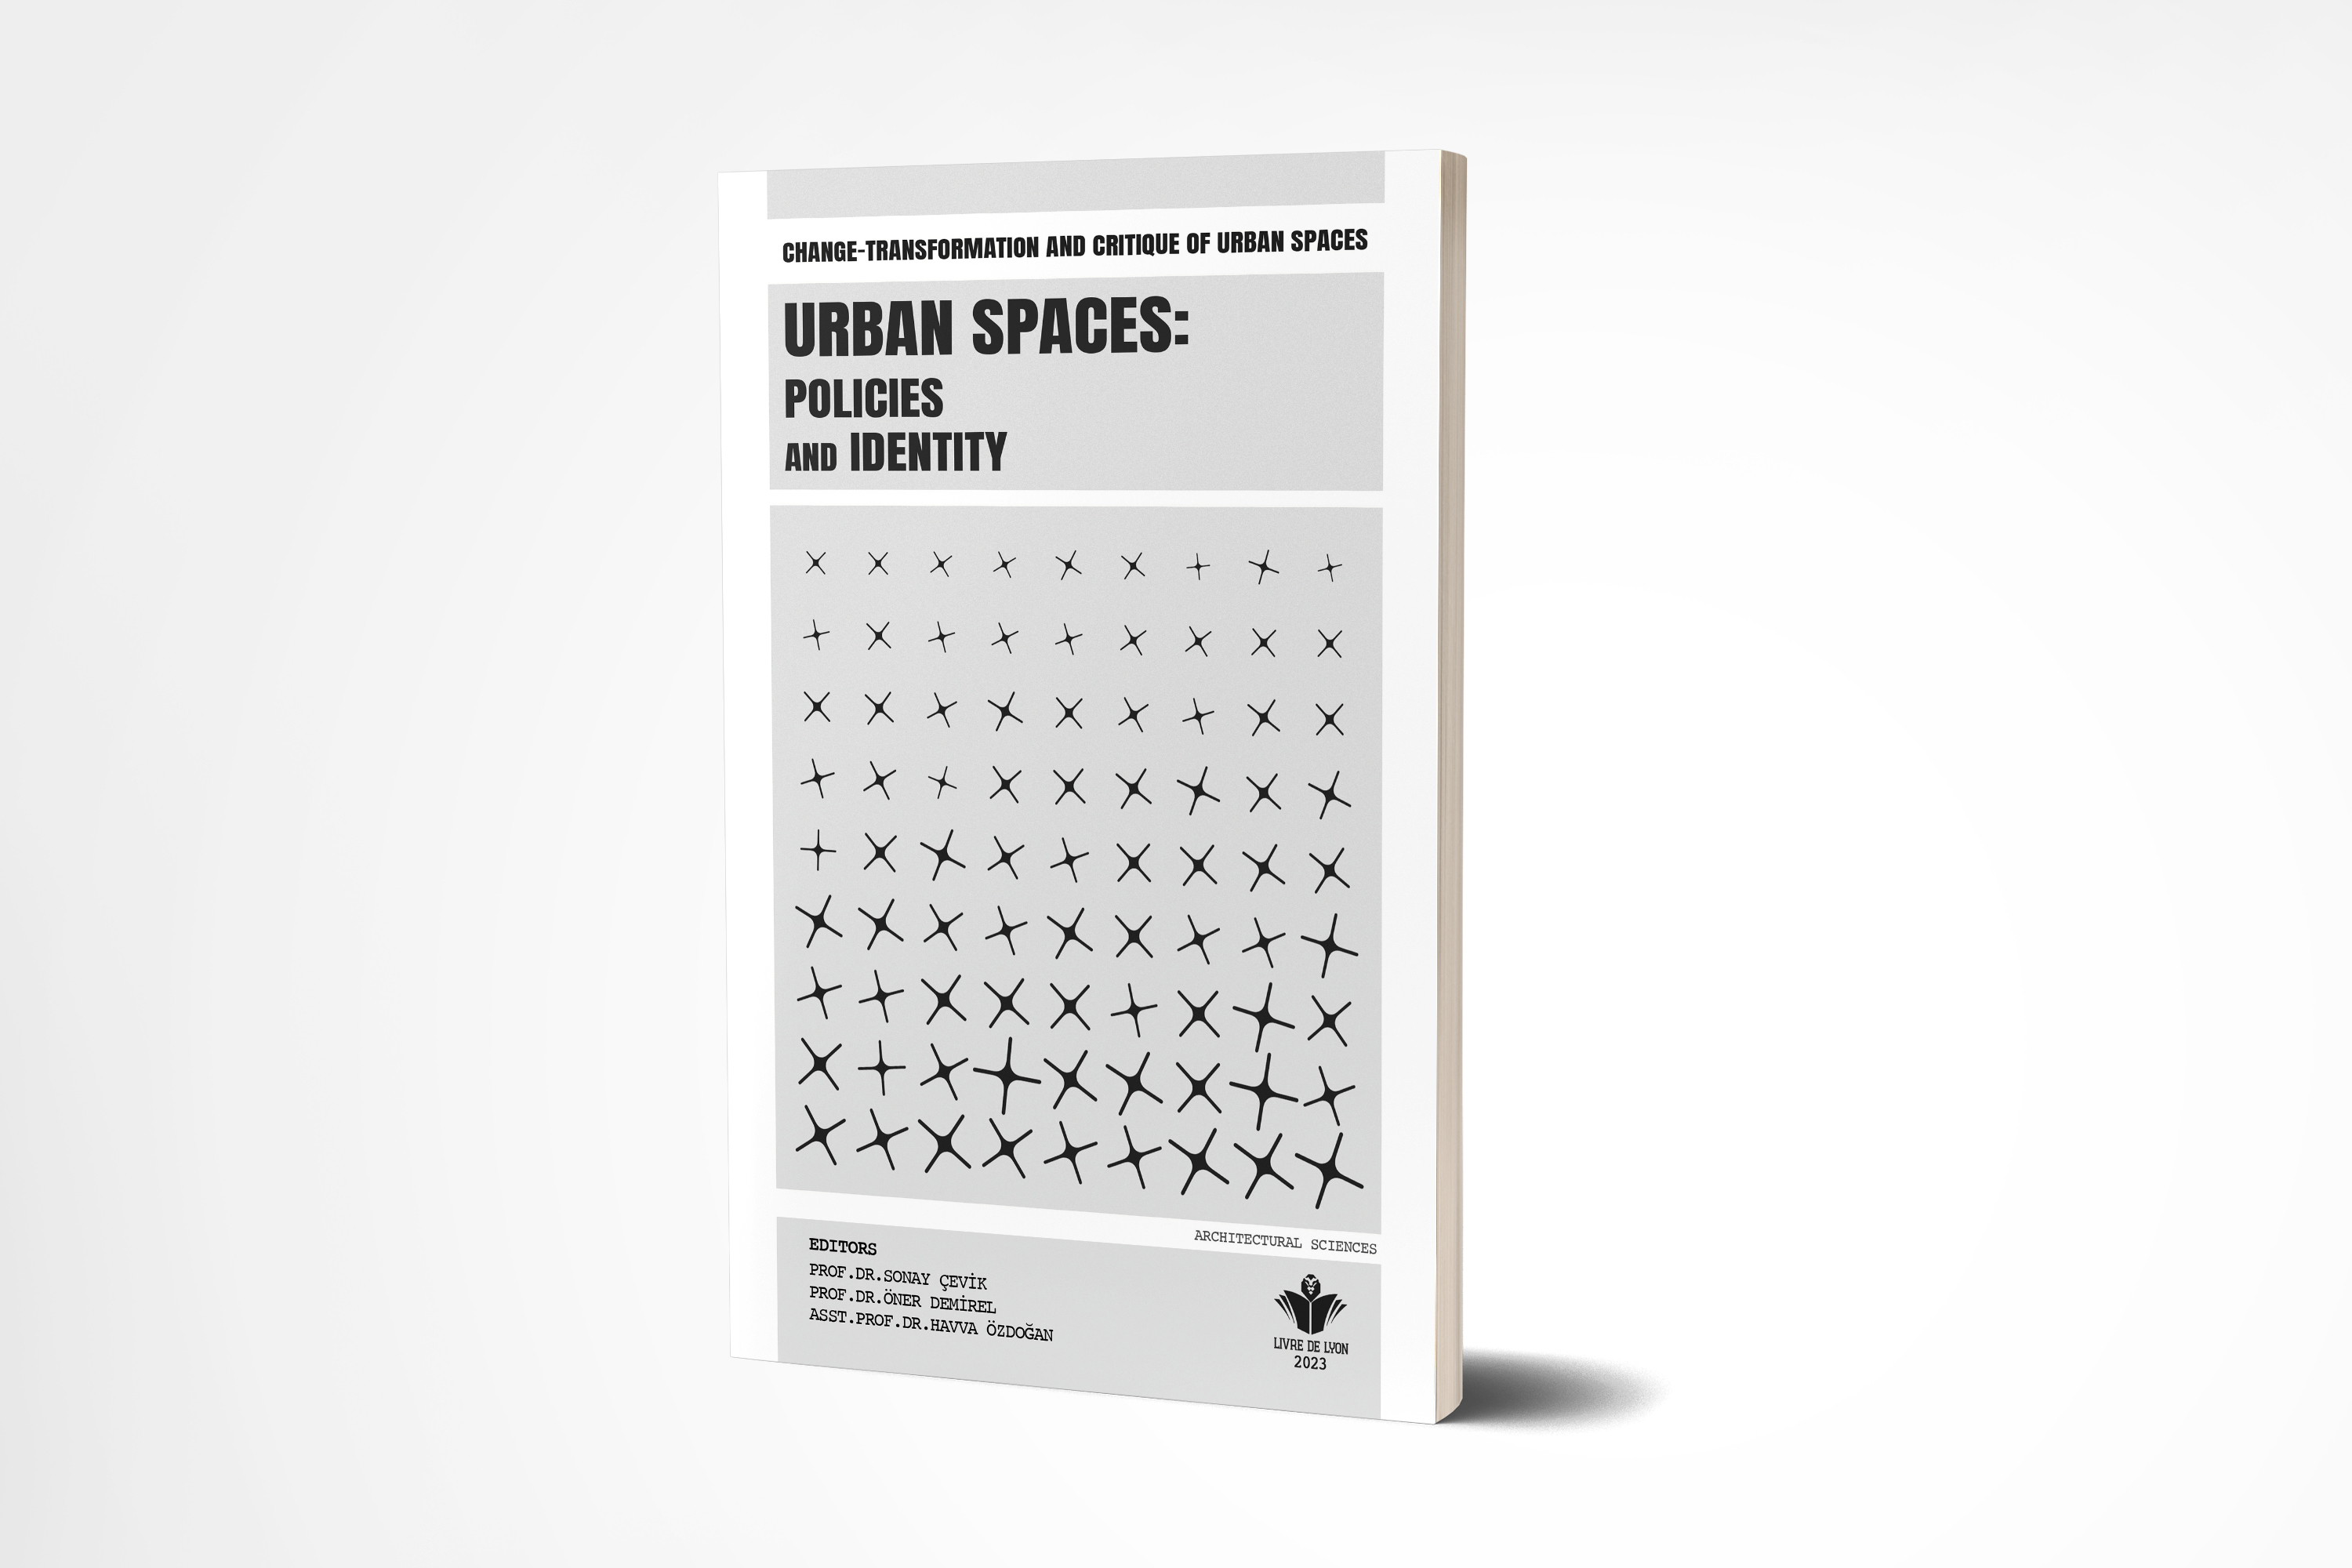 Change-Transformation And Critique of Urban Spaces Urban Spaces: Policies and Identity